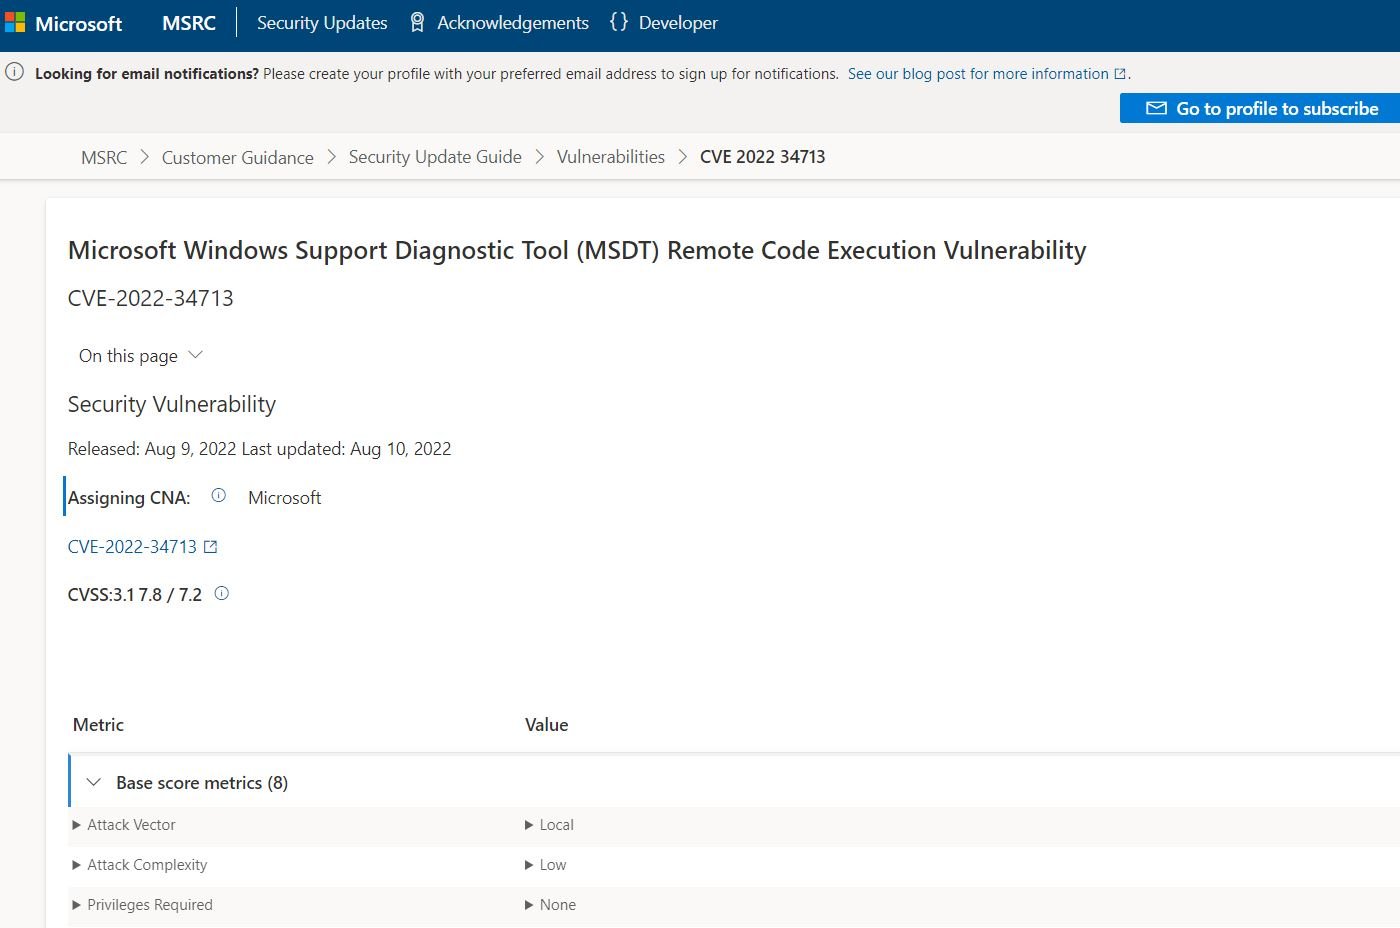 Microsoft patches critical vulenerblity in Windows Support Diagnostic Tool